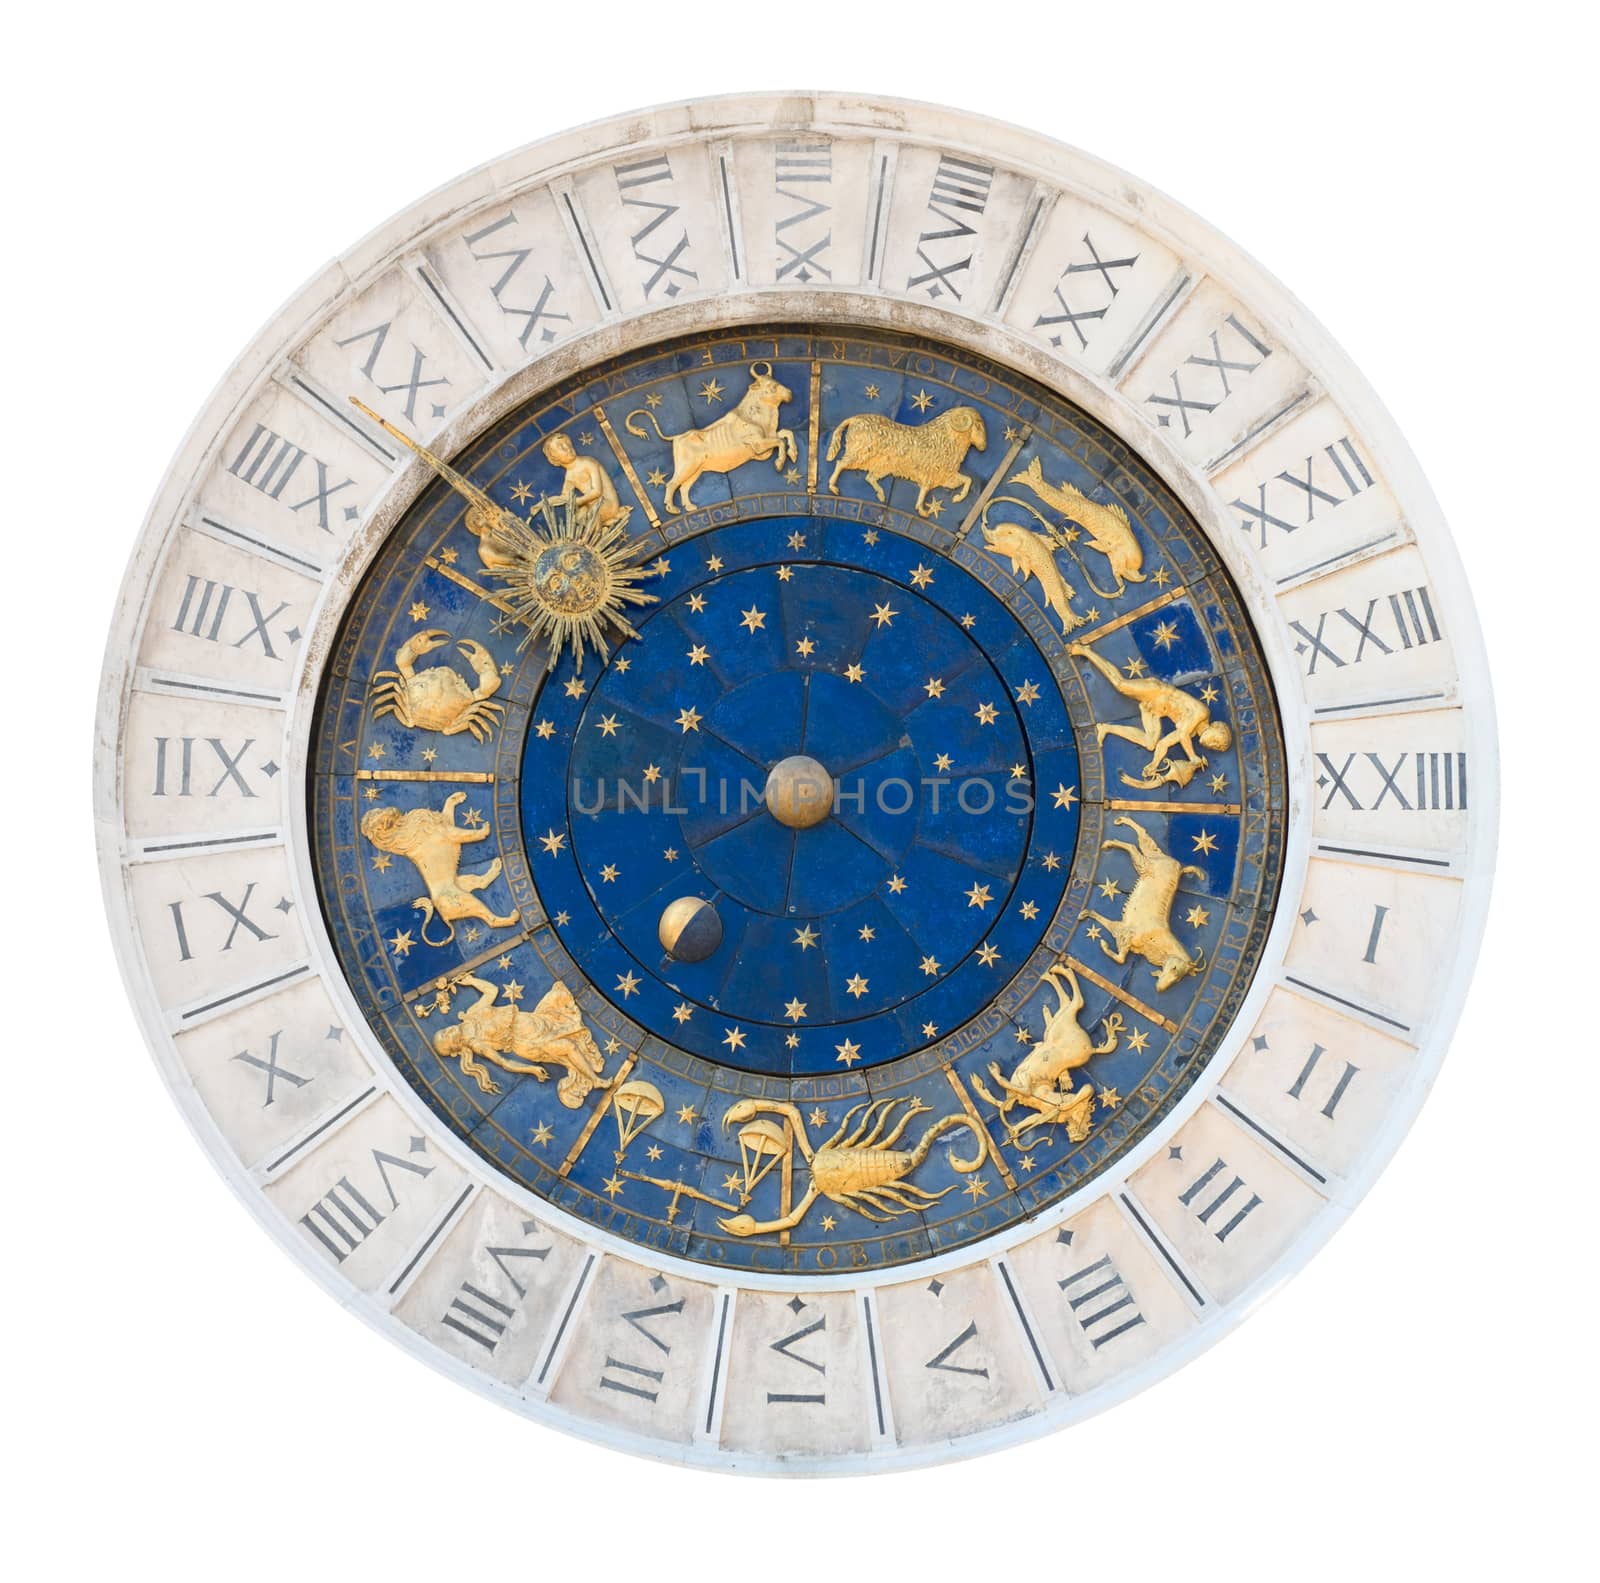 Venice clock tower dial isolated on white with clipping path. It was initially designed by Gian Carlo Rainieri in 1493 and reconstructed several times later. Local name is Torre dell'Orologio.